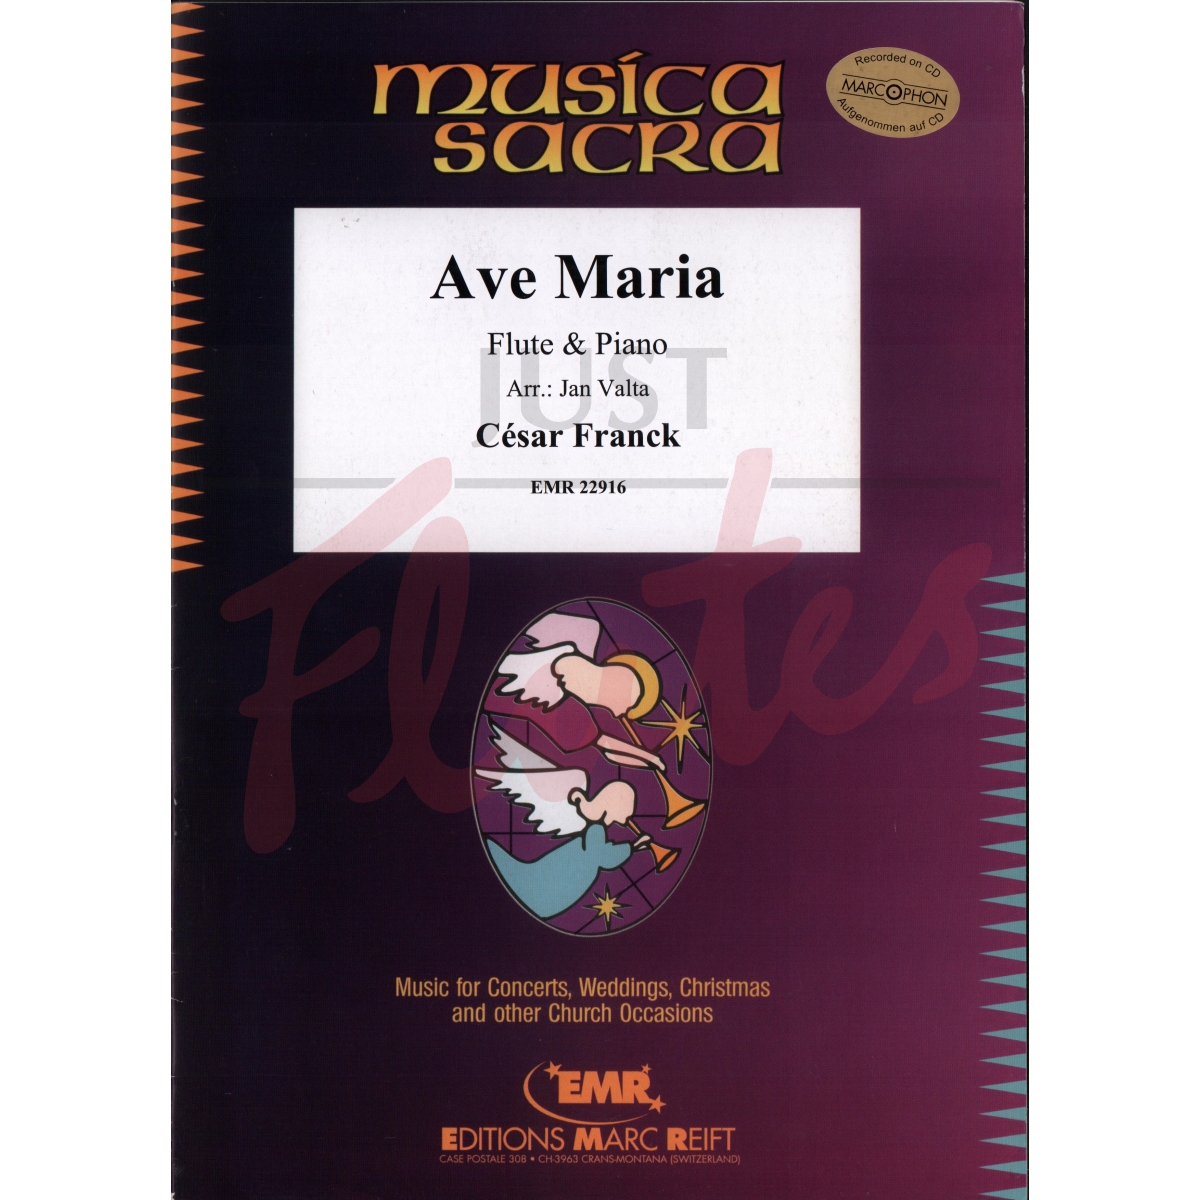 Ave Maria for Flute and Piano